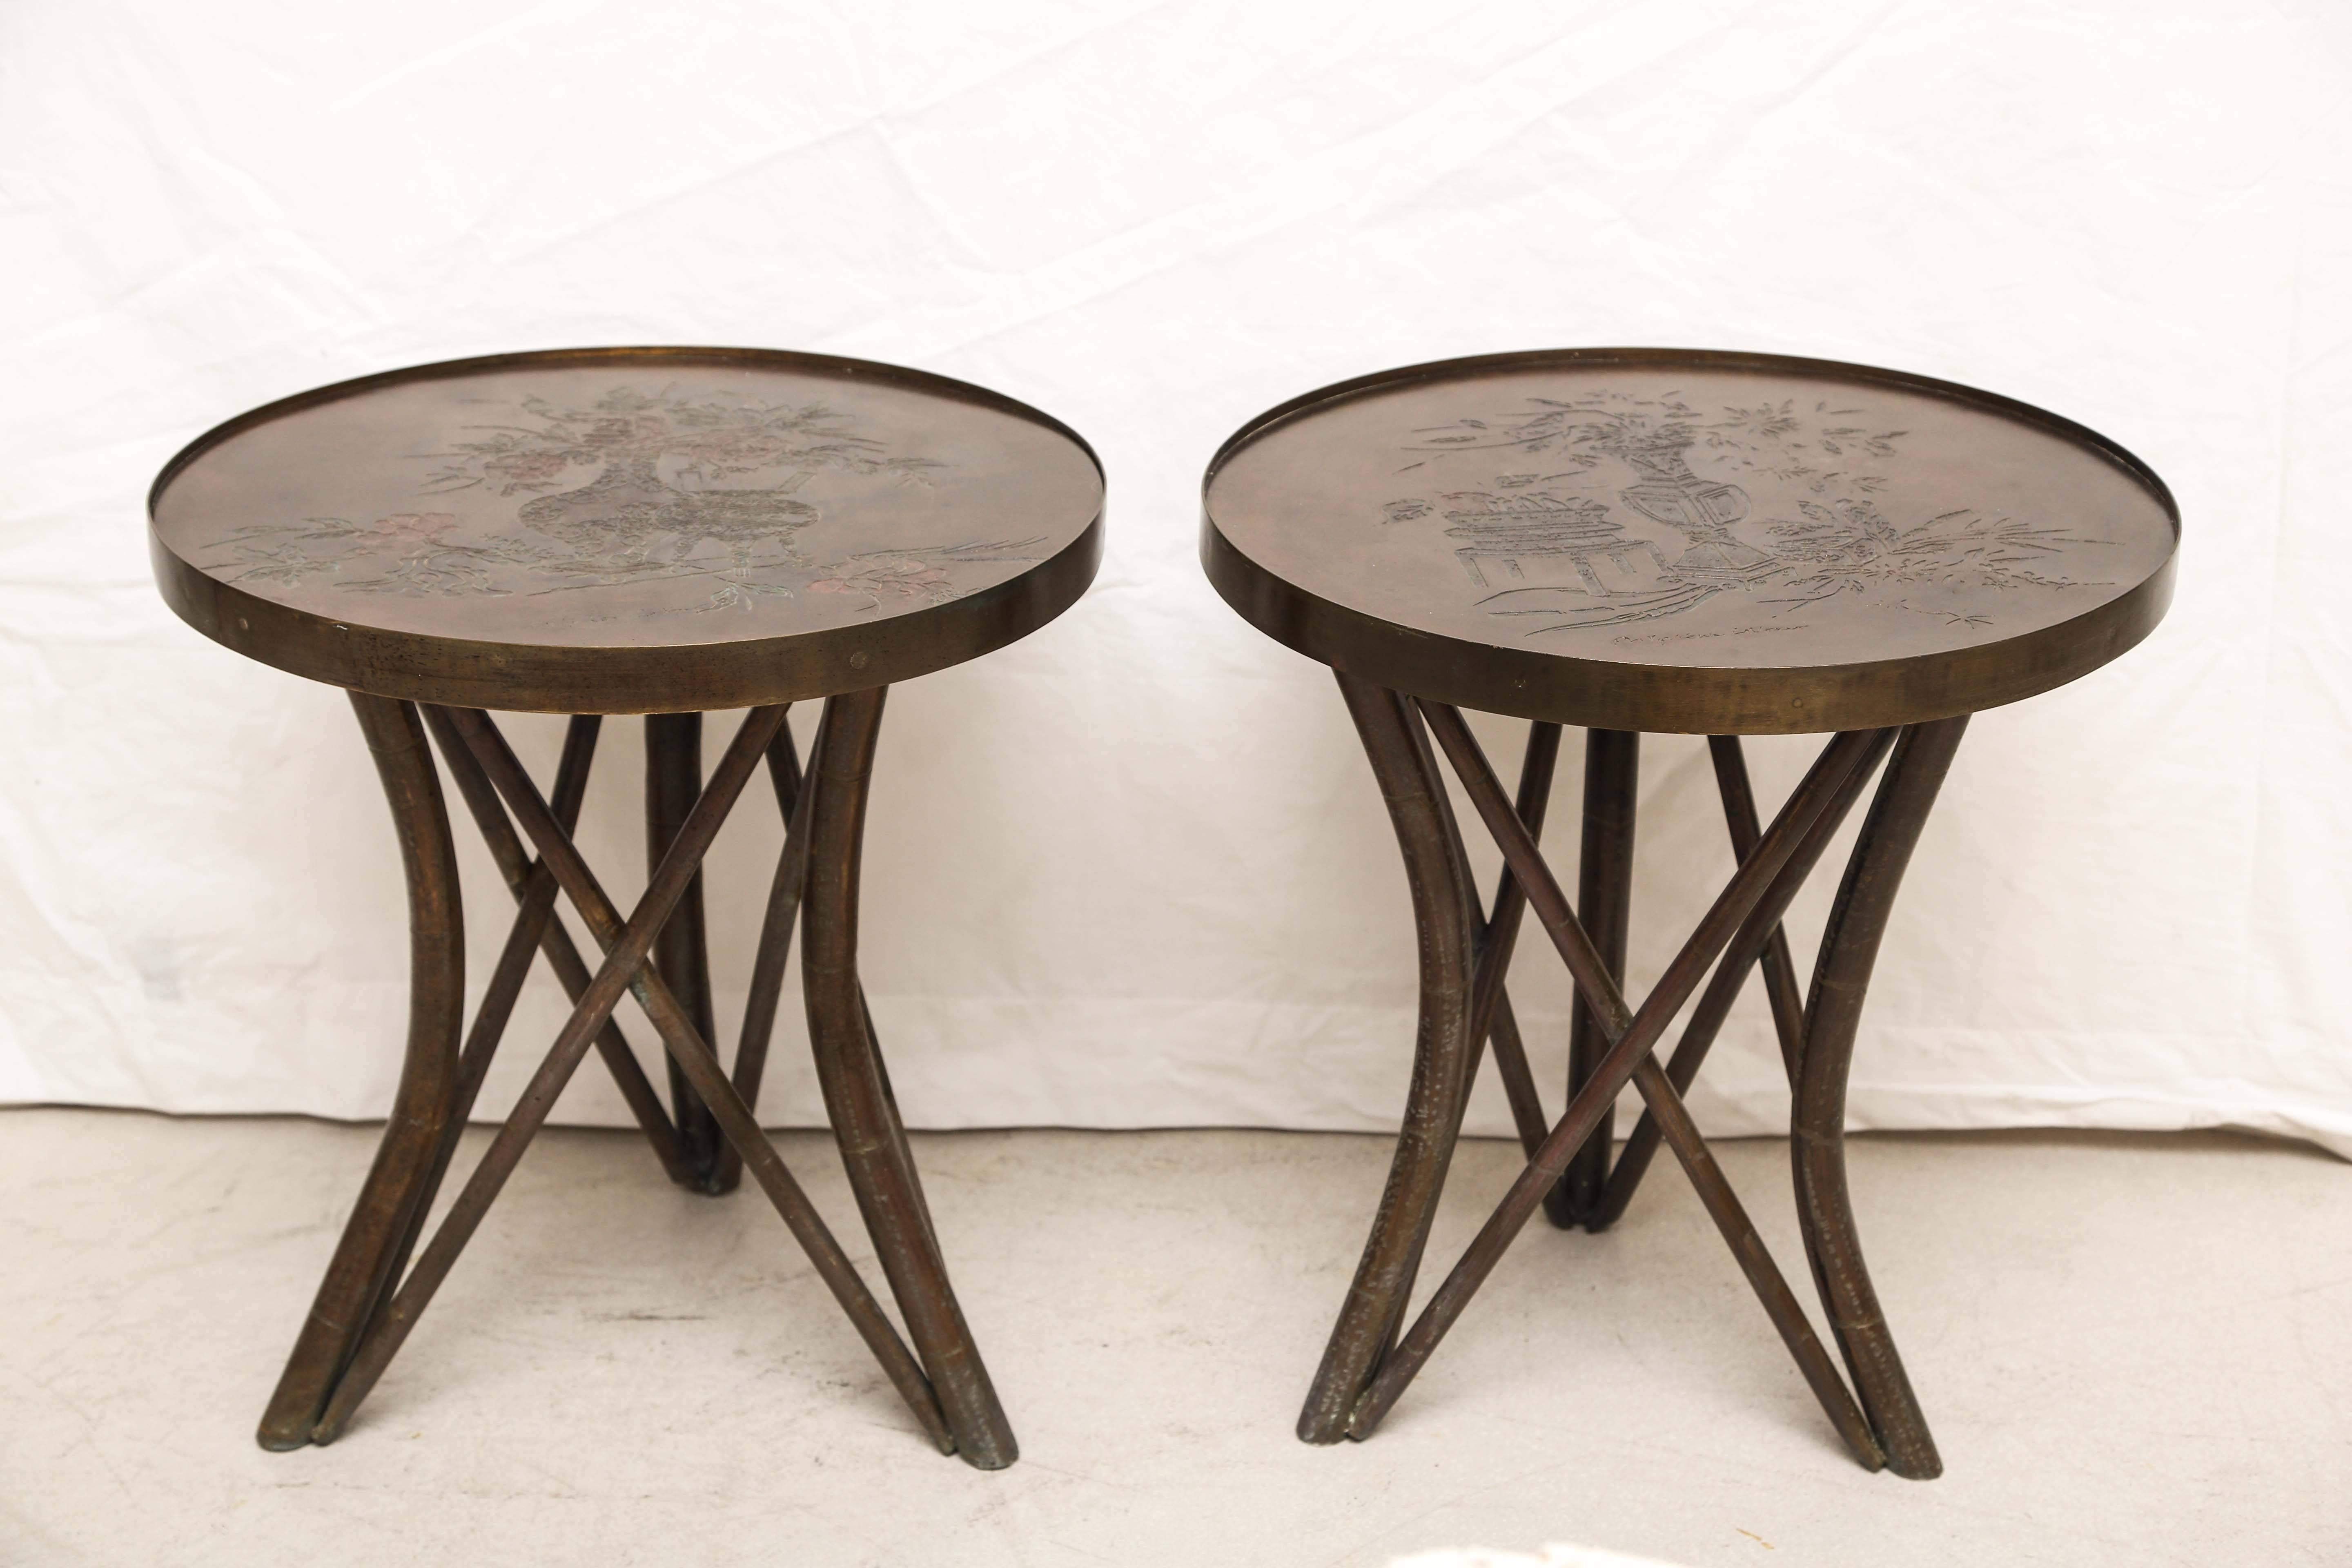 Pair of small hard to find signed Laverne bronze side tables. The model is 